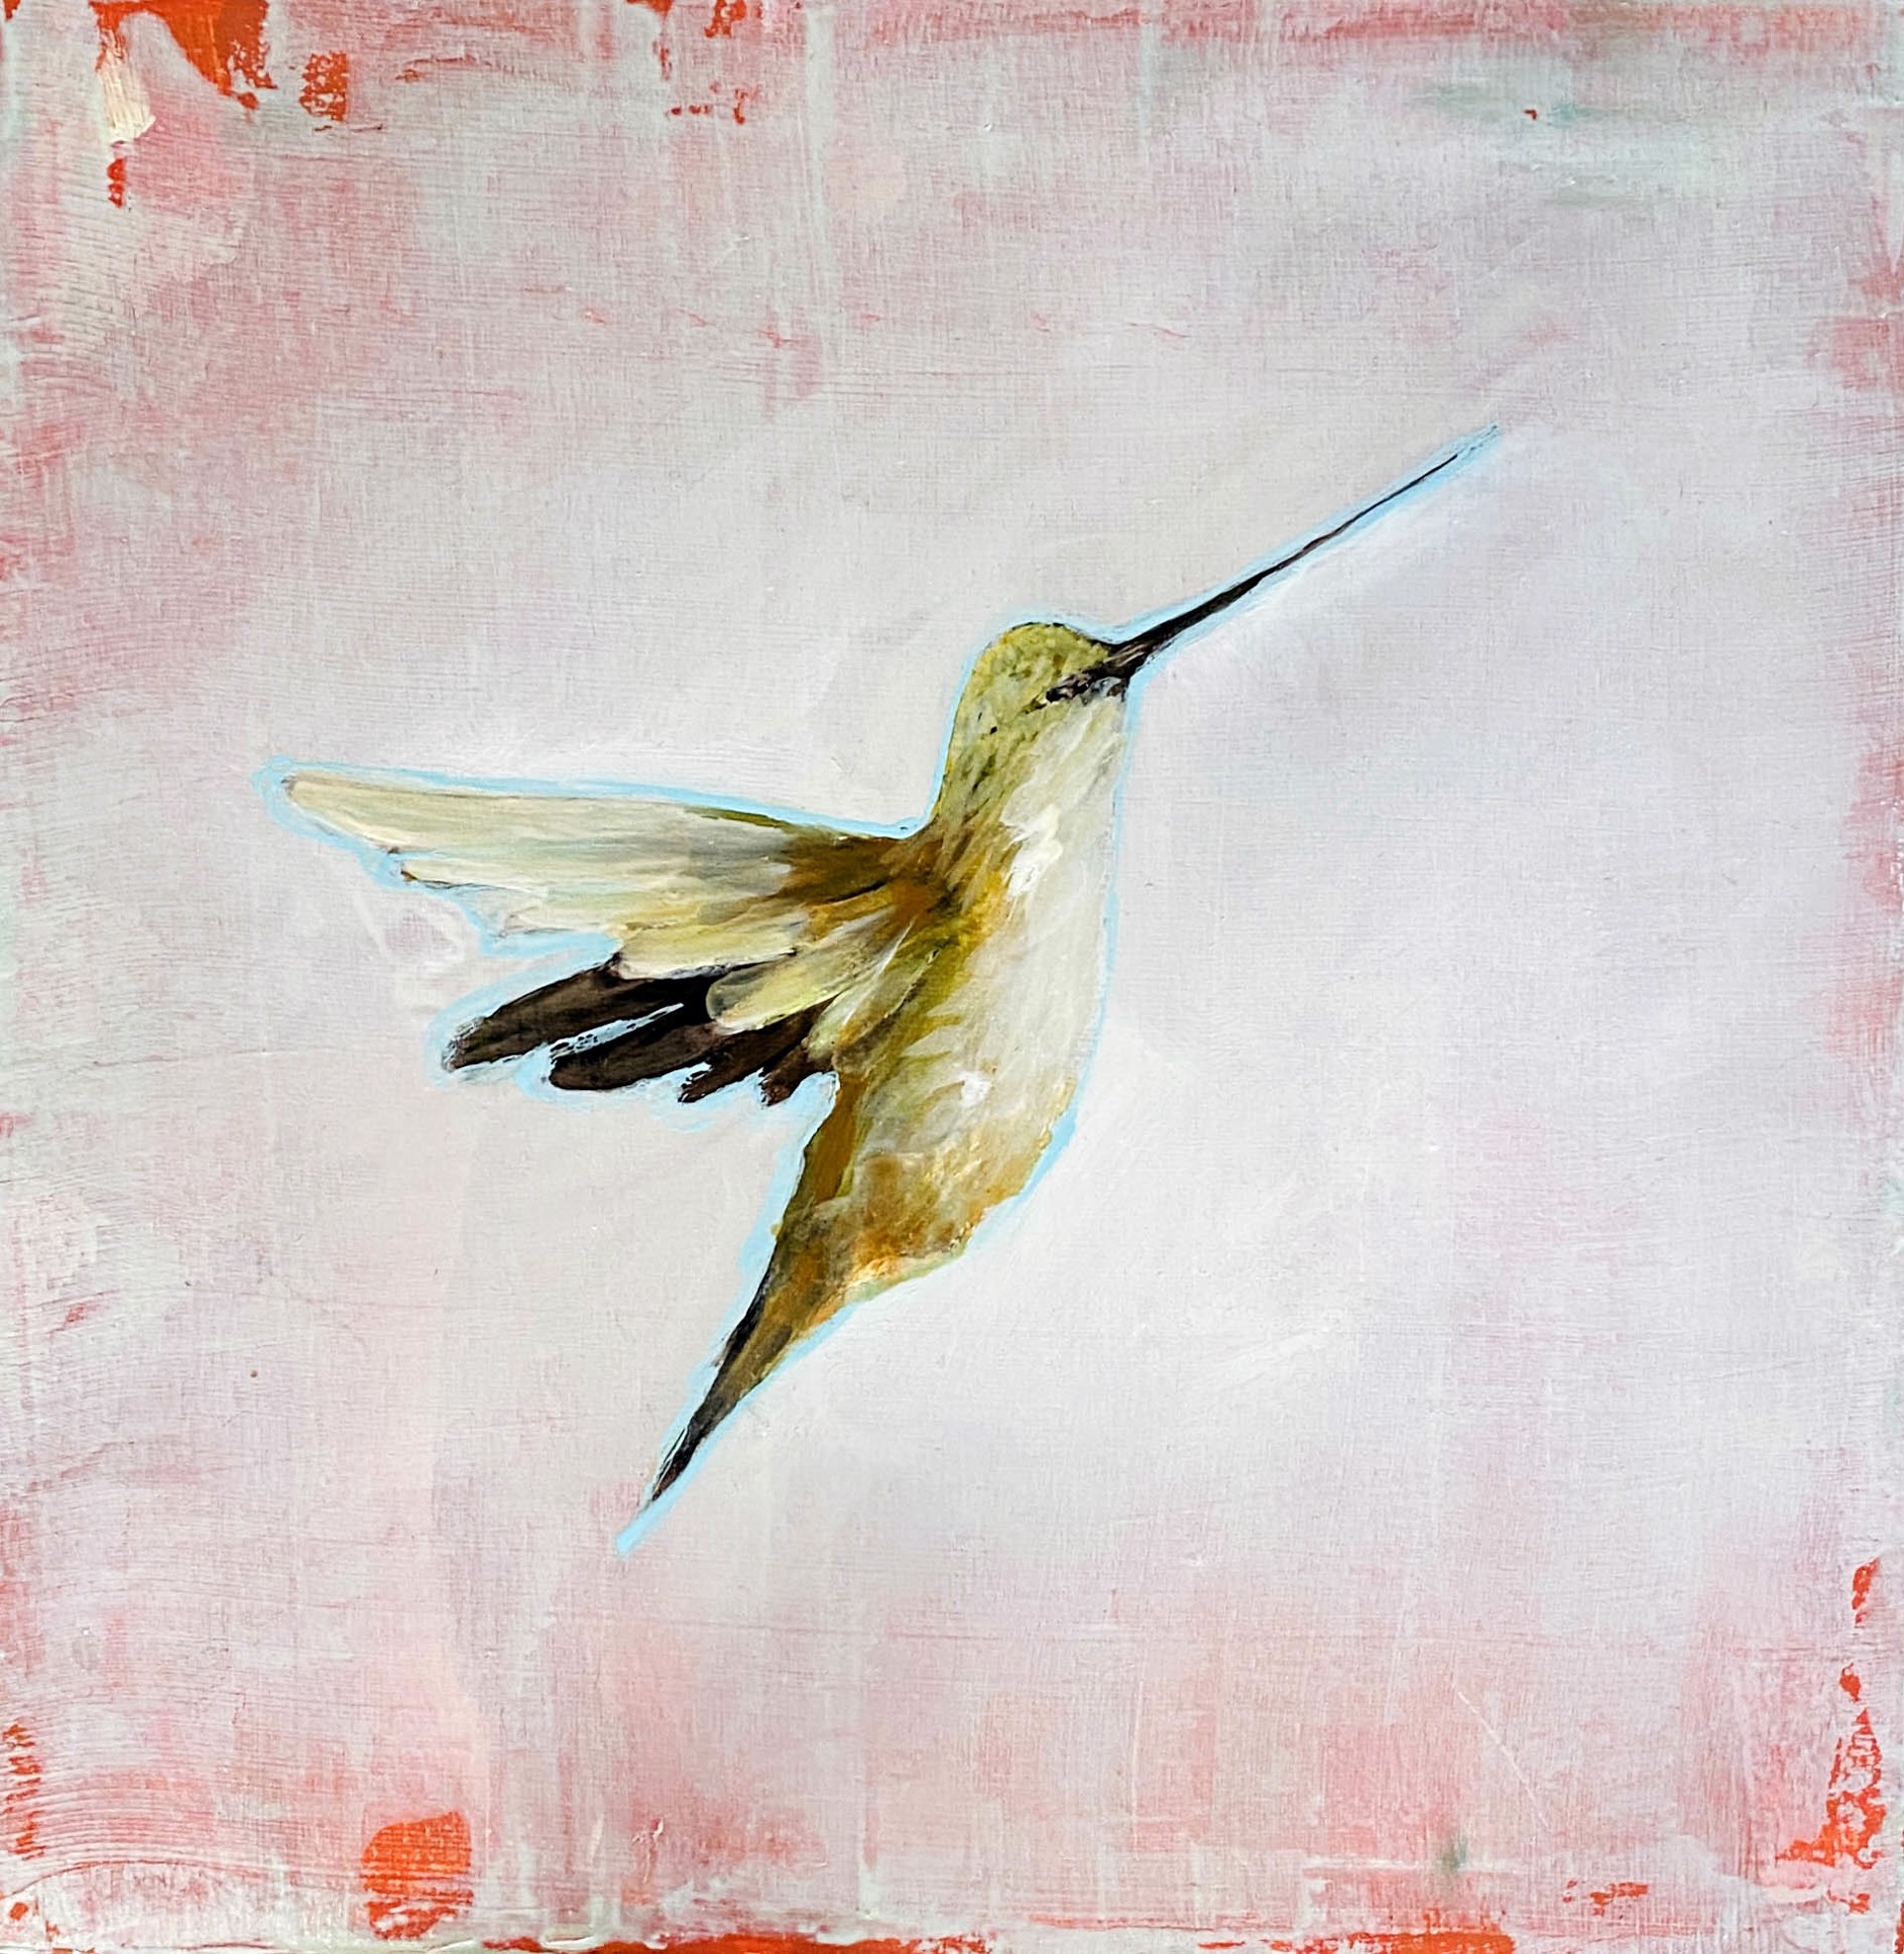 Original Mixed Media Painting Featuring A Single Hummingbird Outlined In Blue Over Abstract Pink And White Background